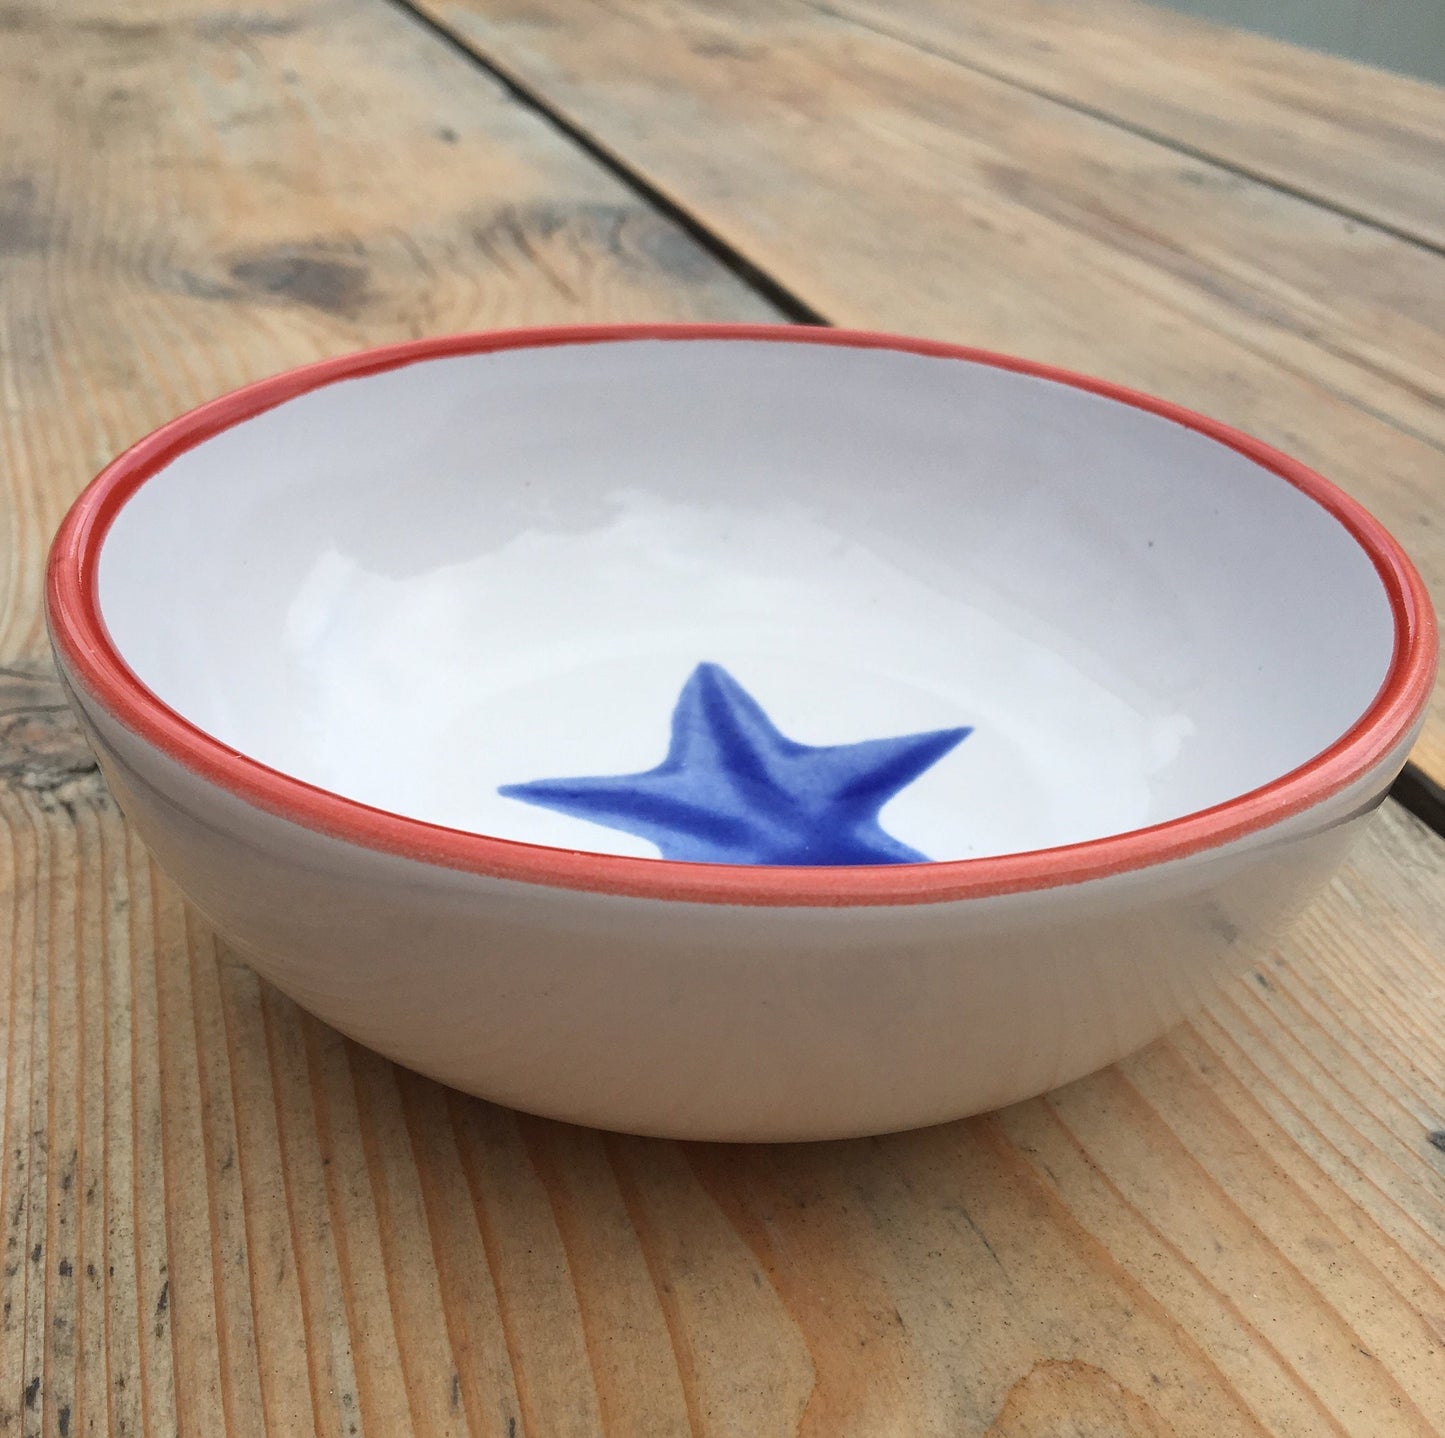 Ceramic children's bowl - red and blue